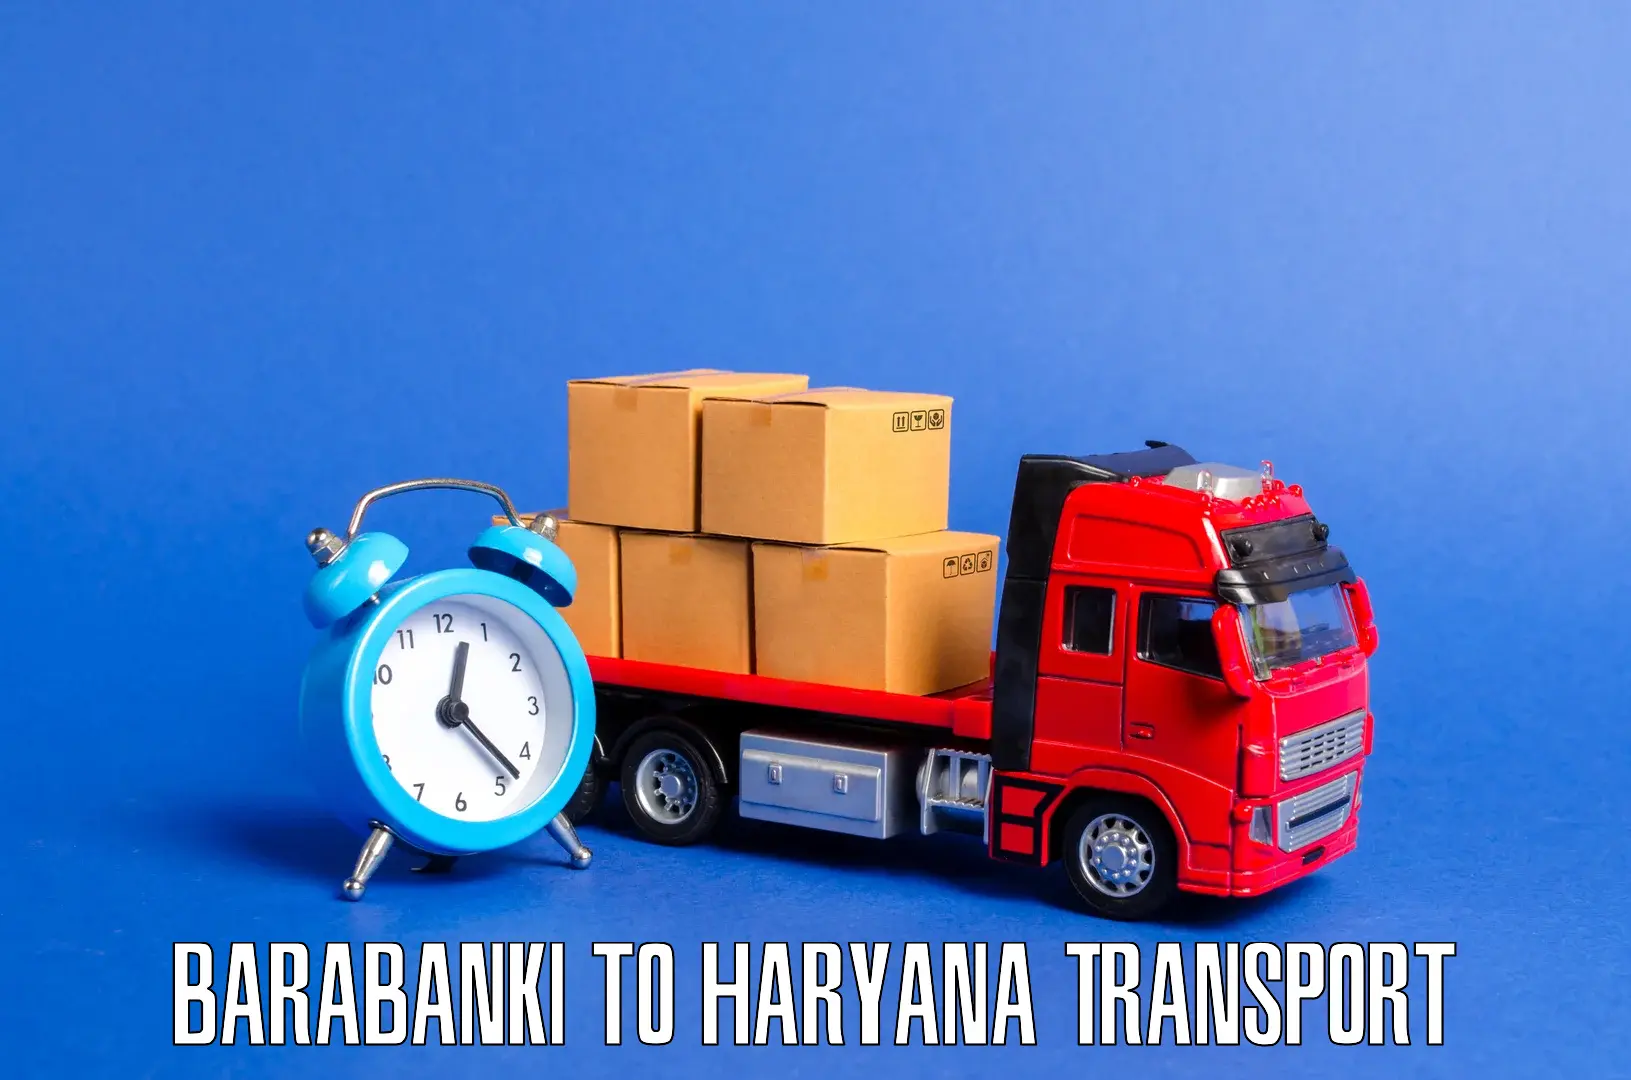 Transport bike from one state to another Barabanki to NCR Haryana